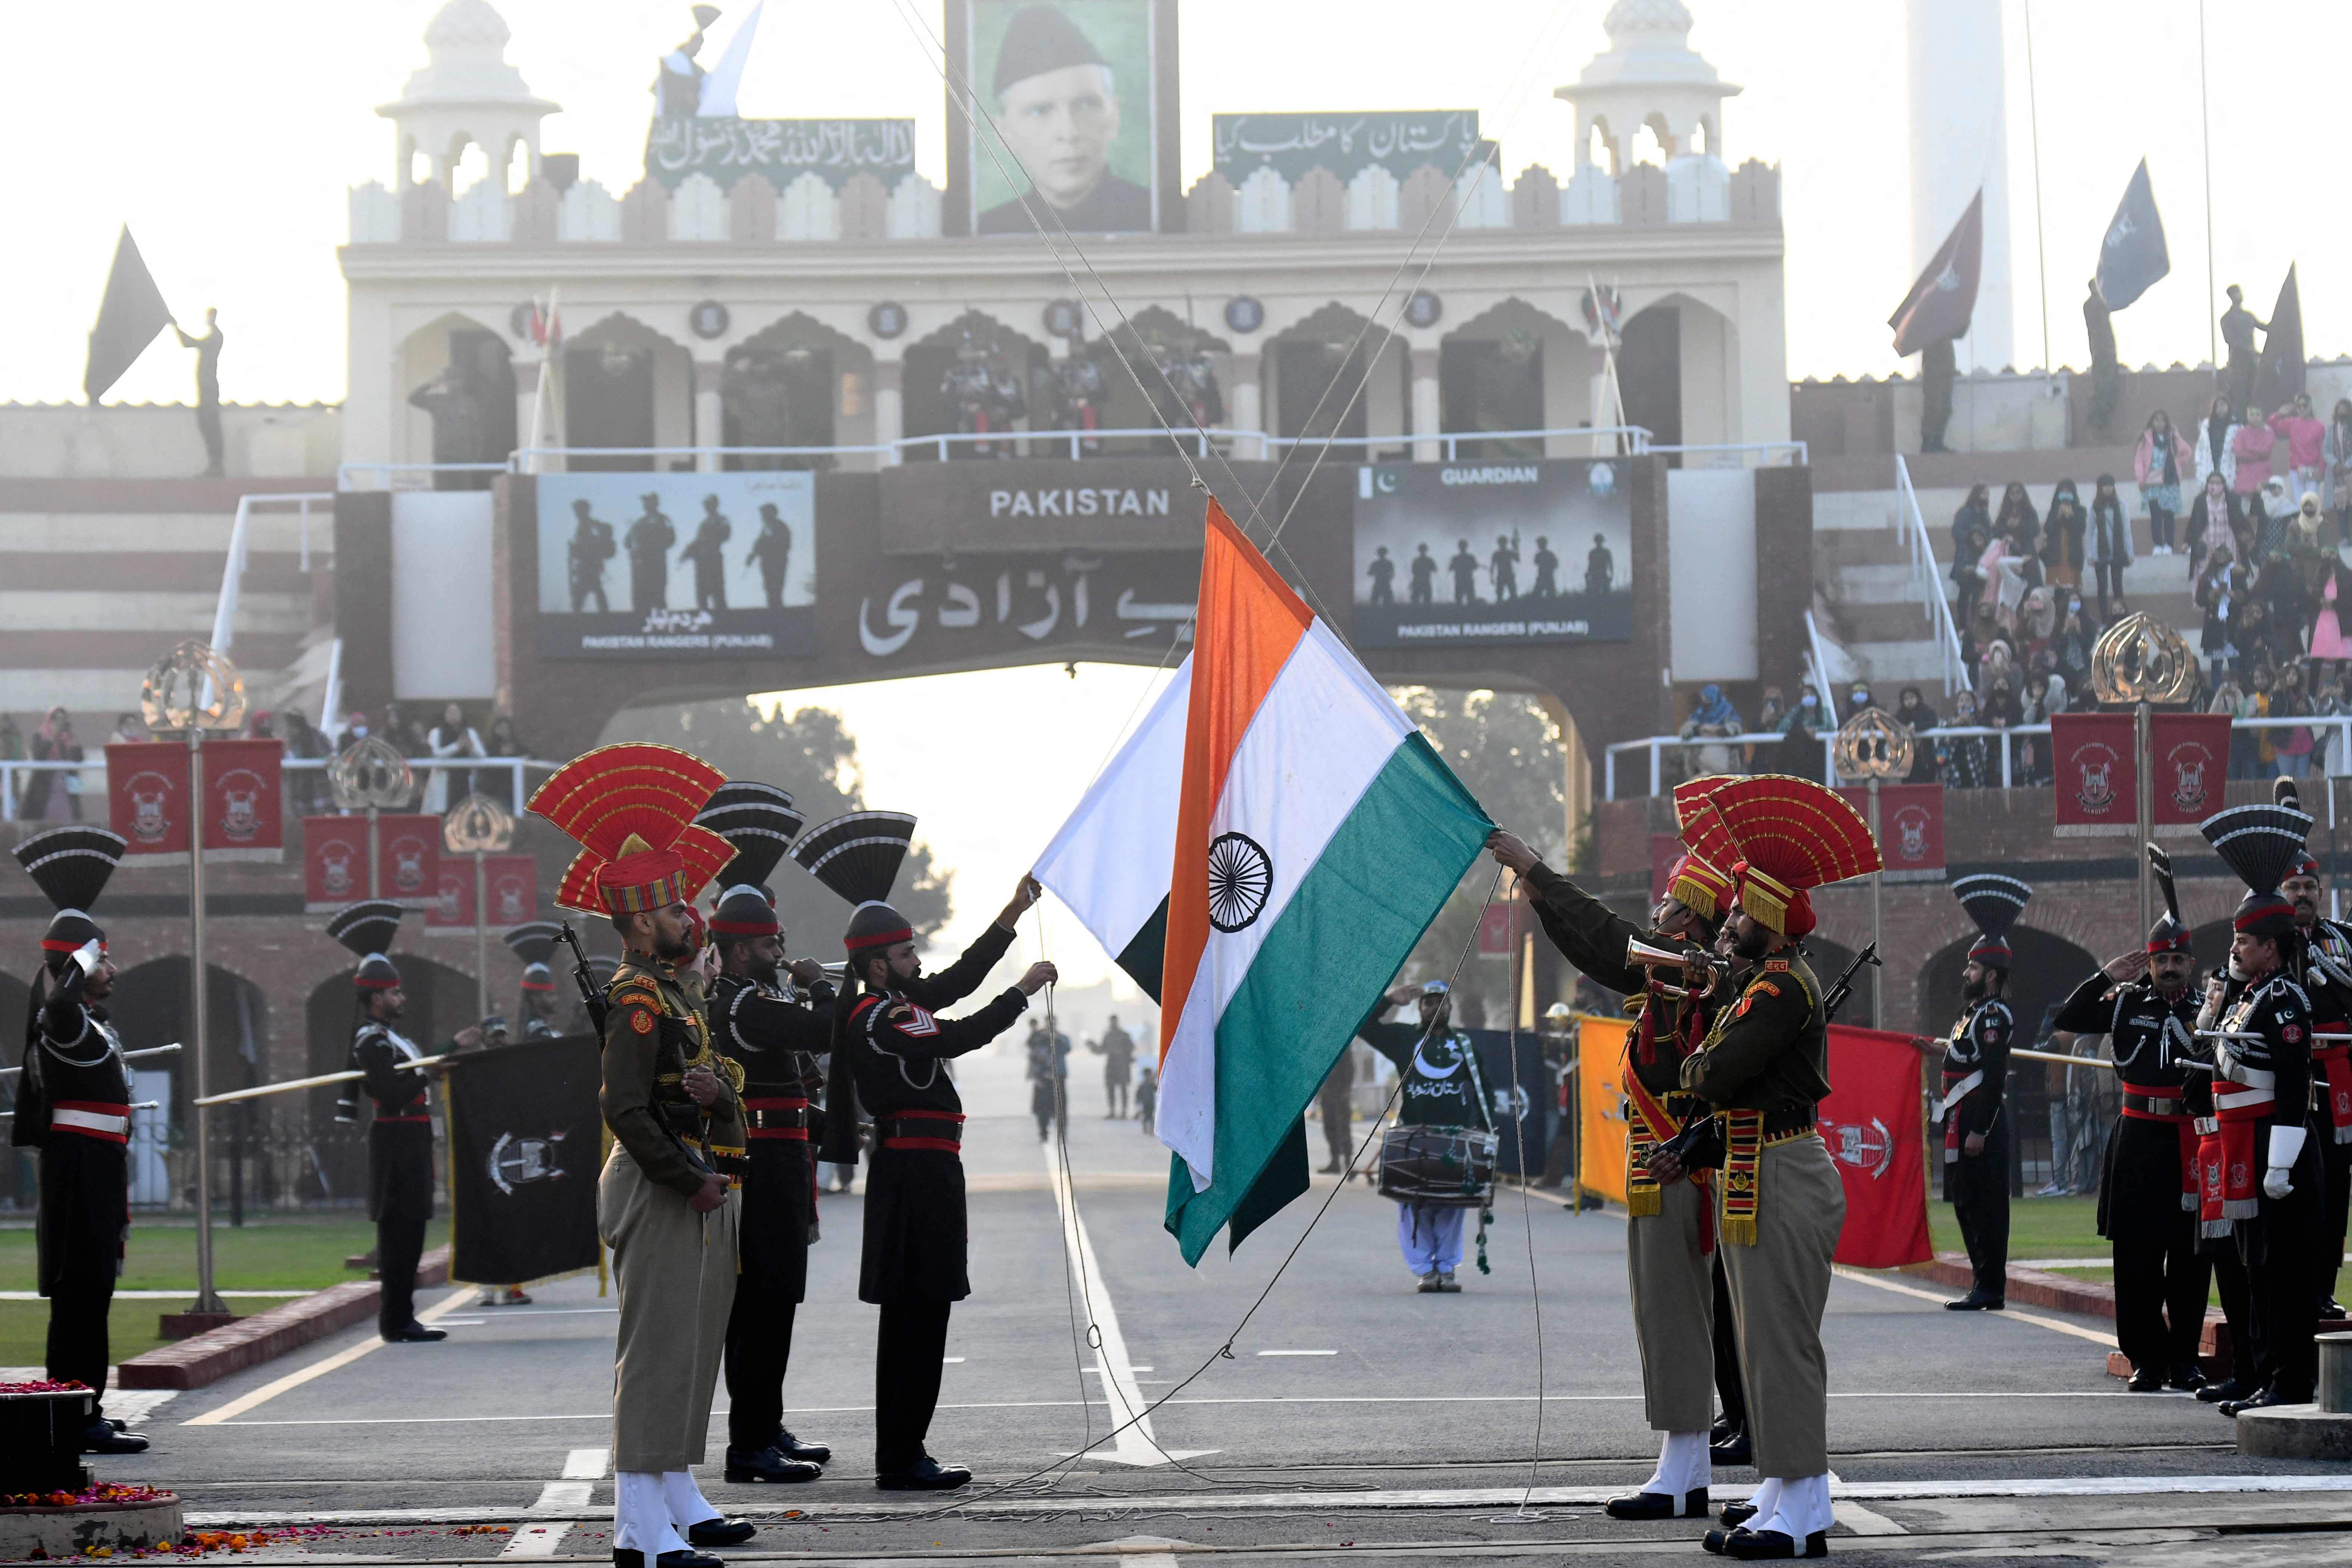 India and Pakistan Gain Independence 75 Years Ago